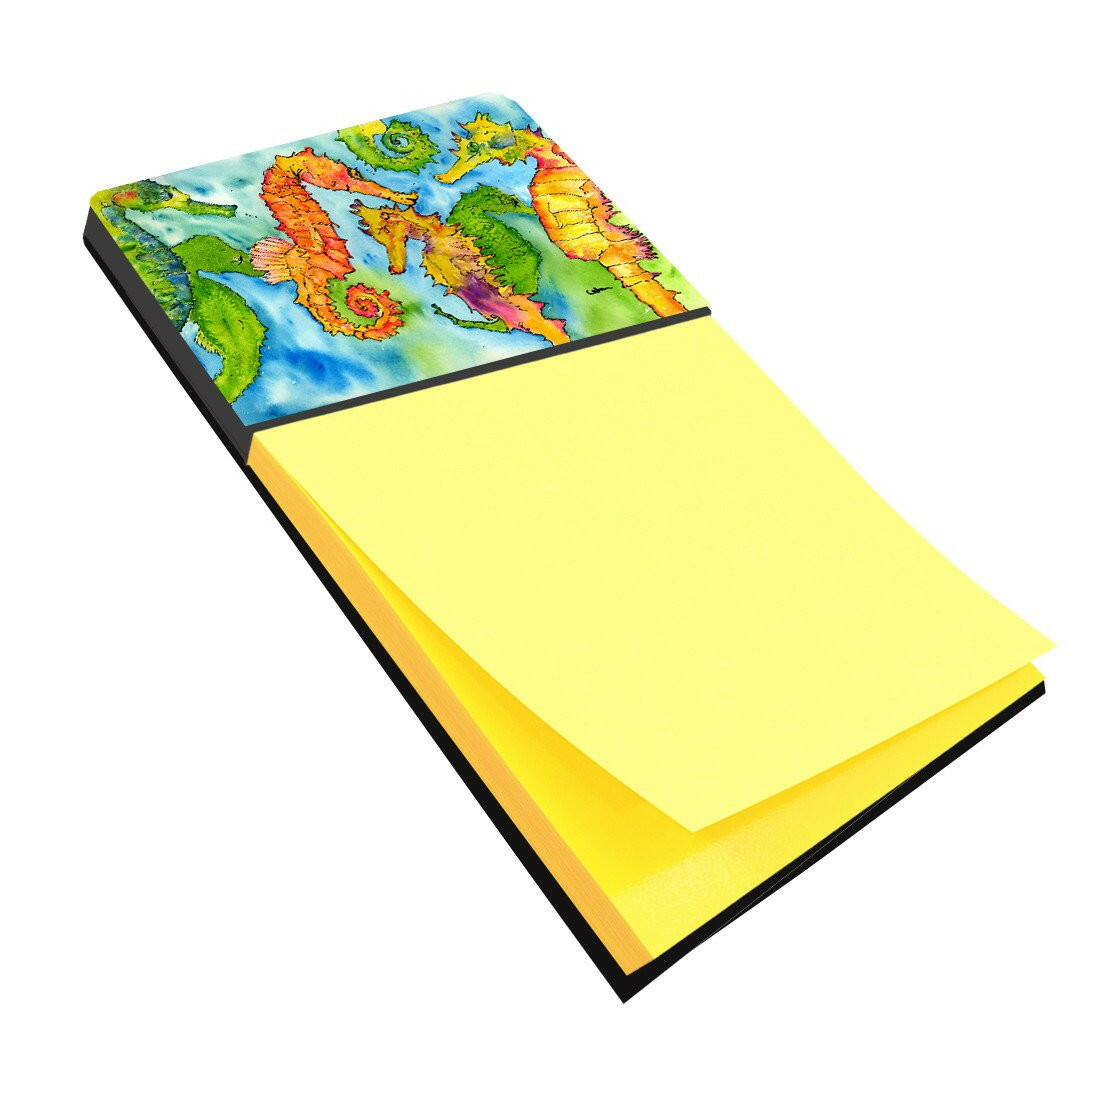 Seahorse Refiillable Sticky Note Holder or Postit Note Dispenser 8546SN by Caroline's Treasures